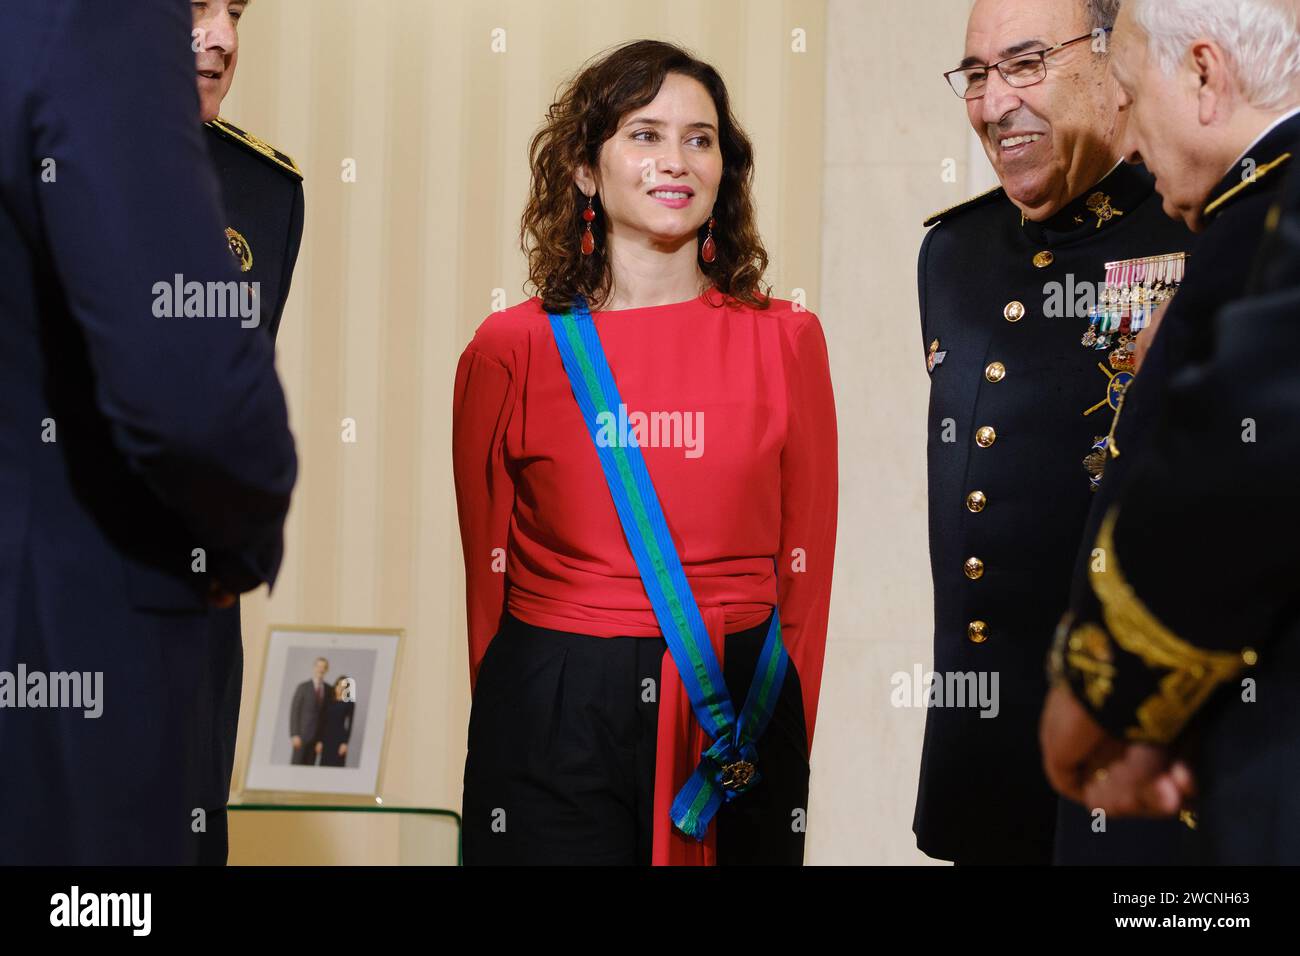 The president of the Community of Madrid, Isabel Diaz Ayuso receives the Sash and Ribbon of Grand Dame of the Royal Thirds of Spain at the Real Casa d Stock Photo